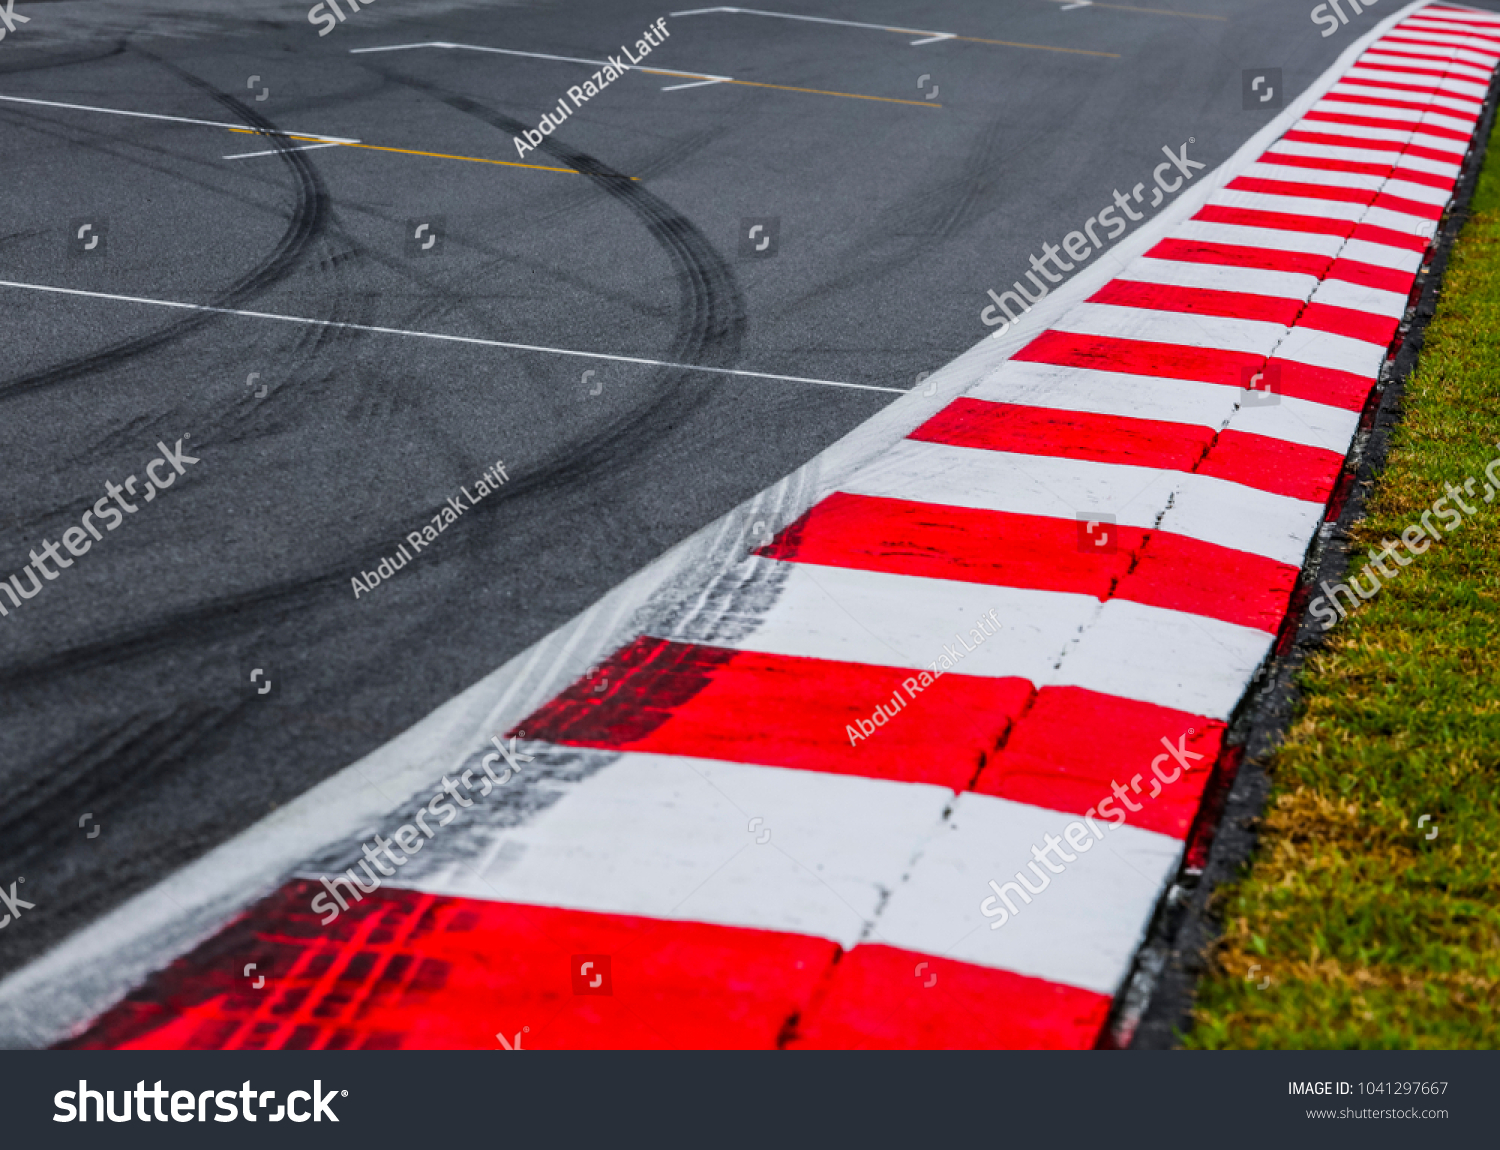 Asphalt red and white kerb of a race track detail with tire marks. Motorsports racing circuit close up.  #1041297667